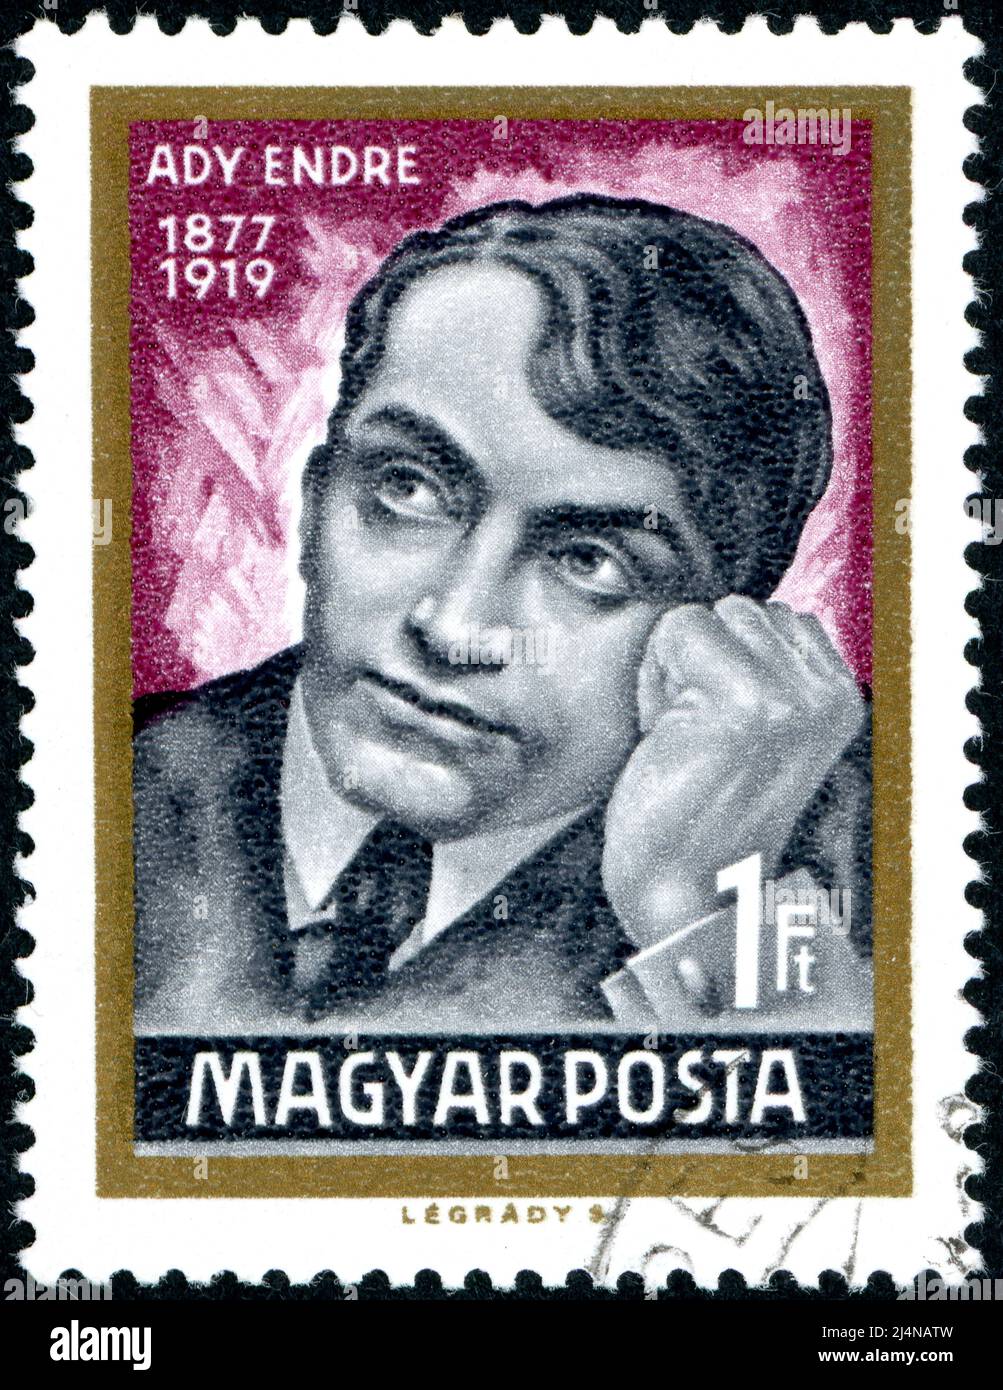 HUNGARY - CIRCA 1969: Postage stamp printed in Hungary, showing portrait of Endre Ady, a Hungarian poet and journalist, circa 1969 Stock Photo